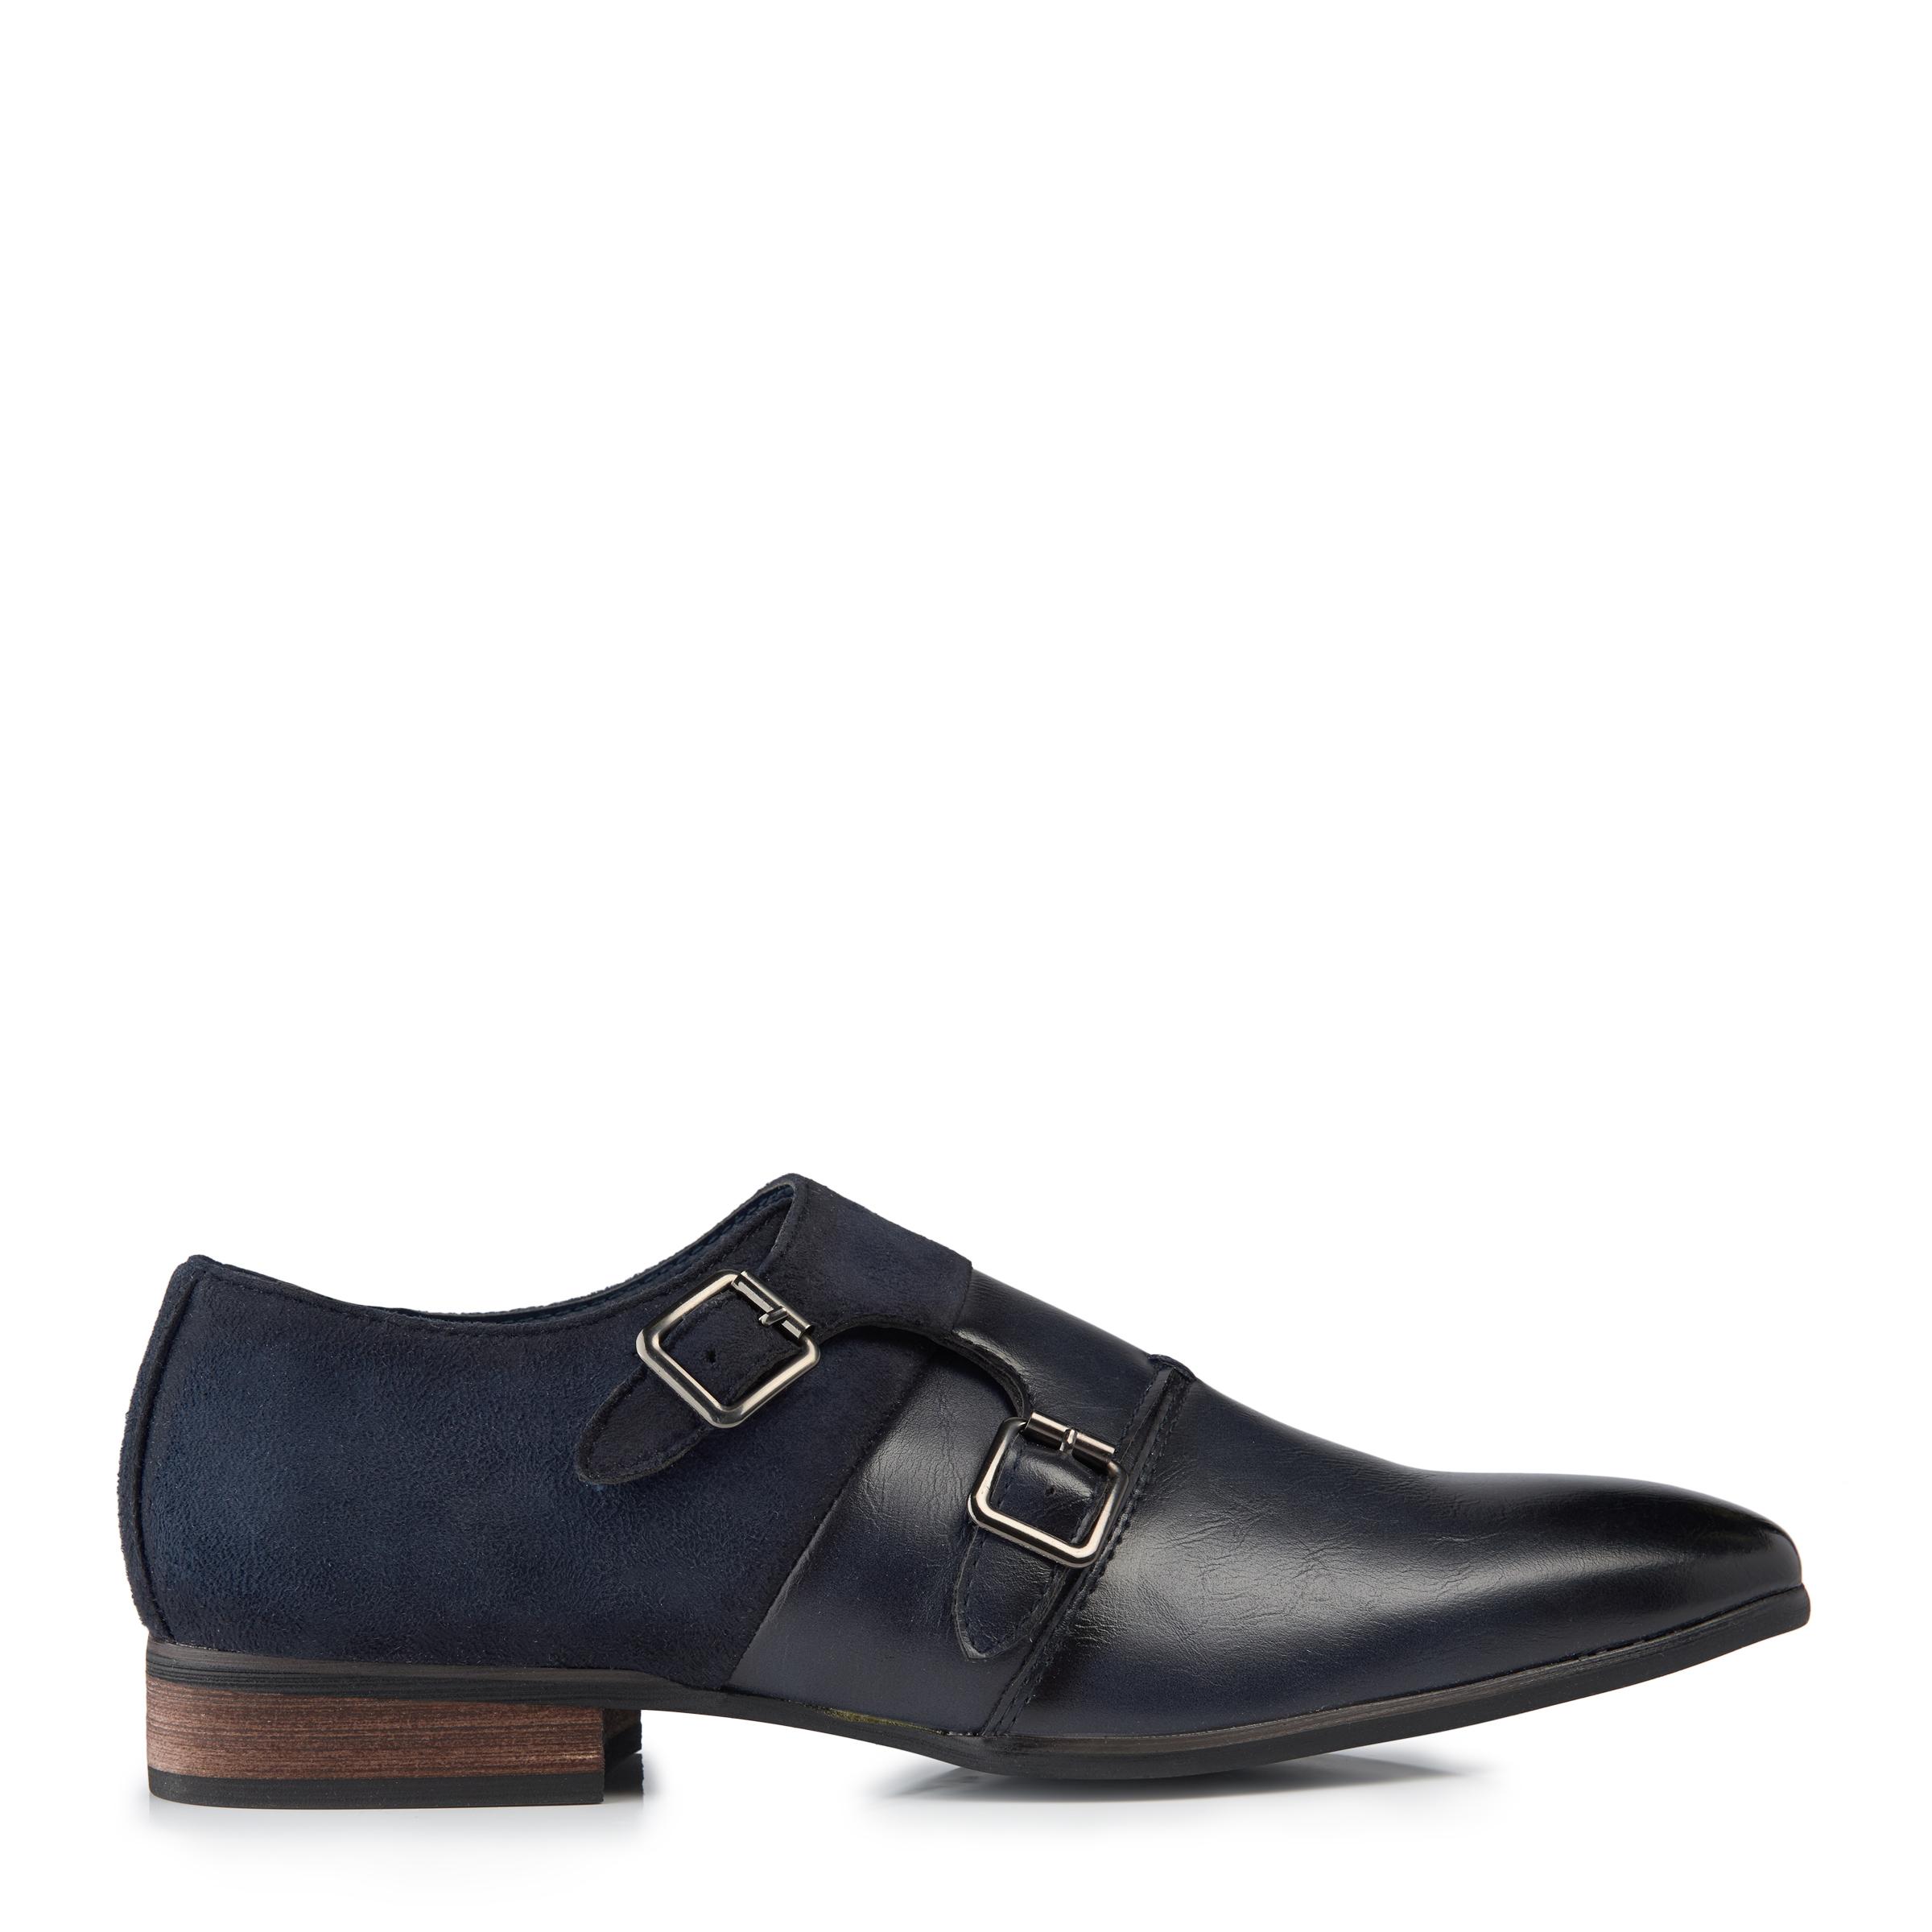 truworths formal shoes for ladies